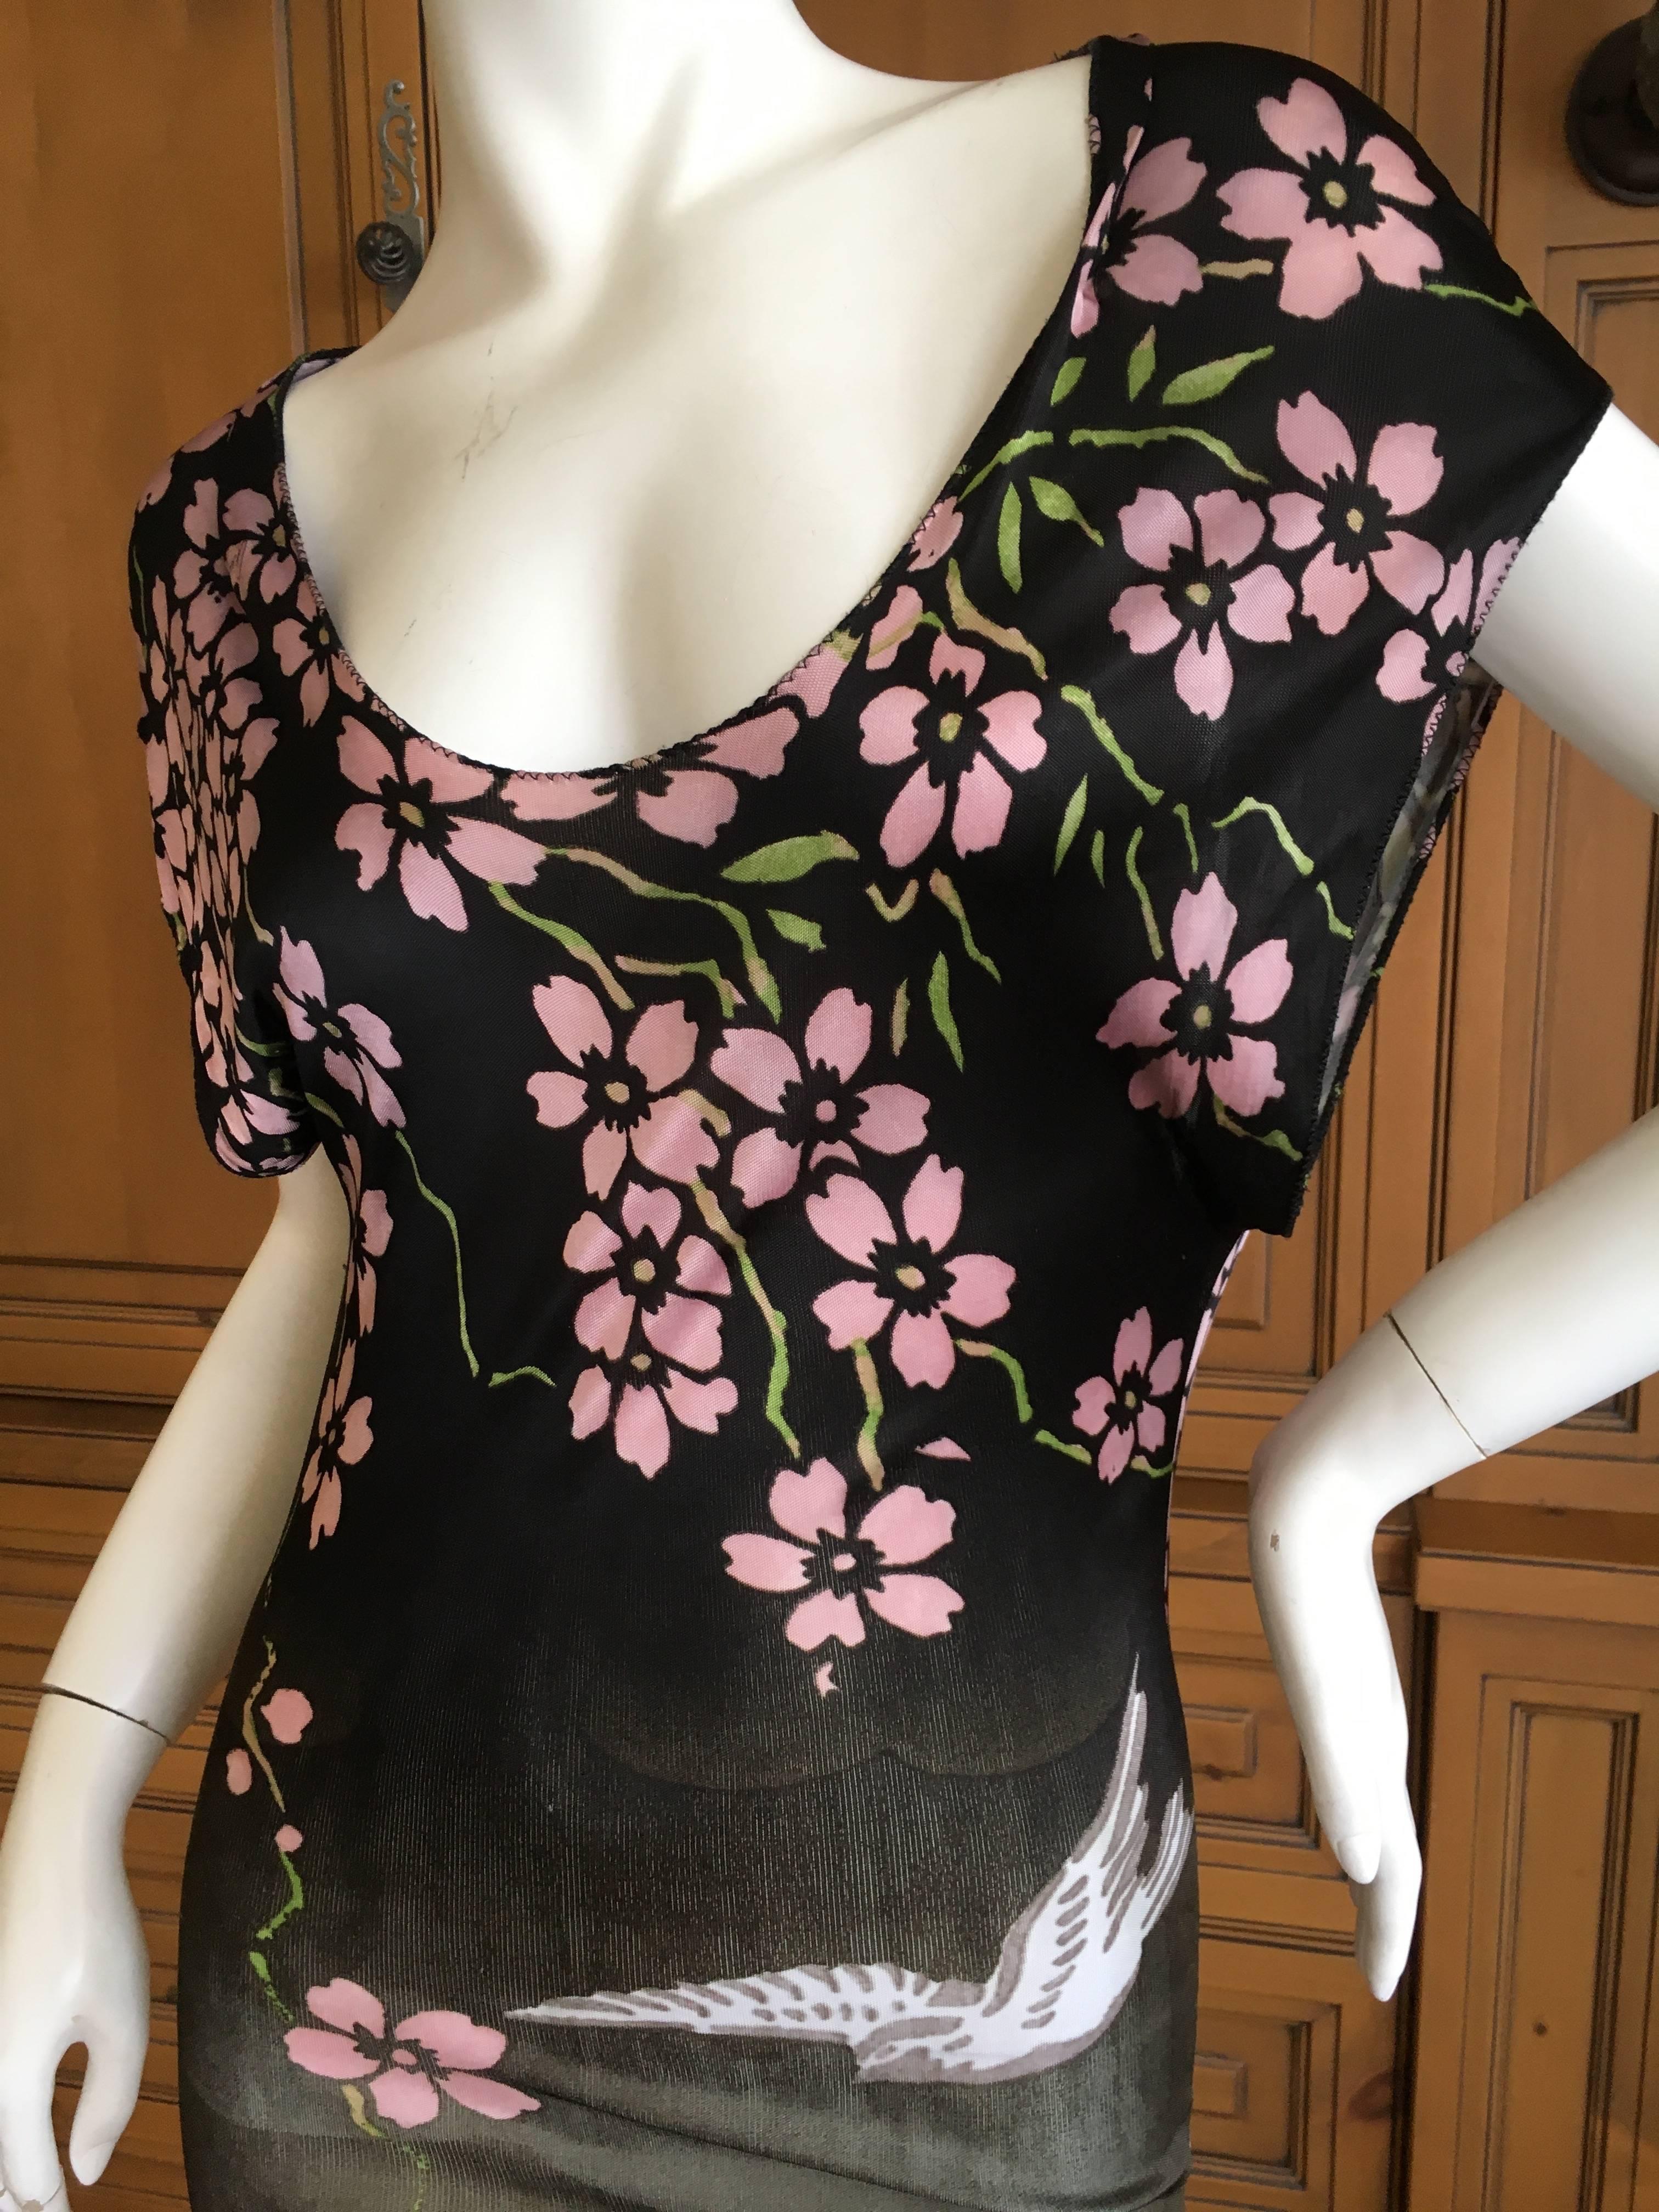 Gucci 2003  Tom Ford Japonaise Dogwood Blossom Mini Dress In Excellent Condition For Sale In Cloverdale, CA